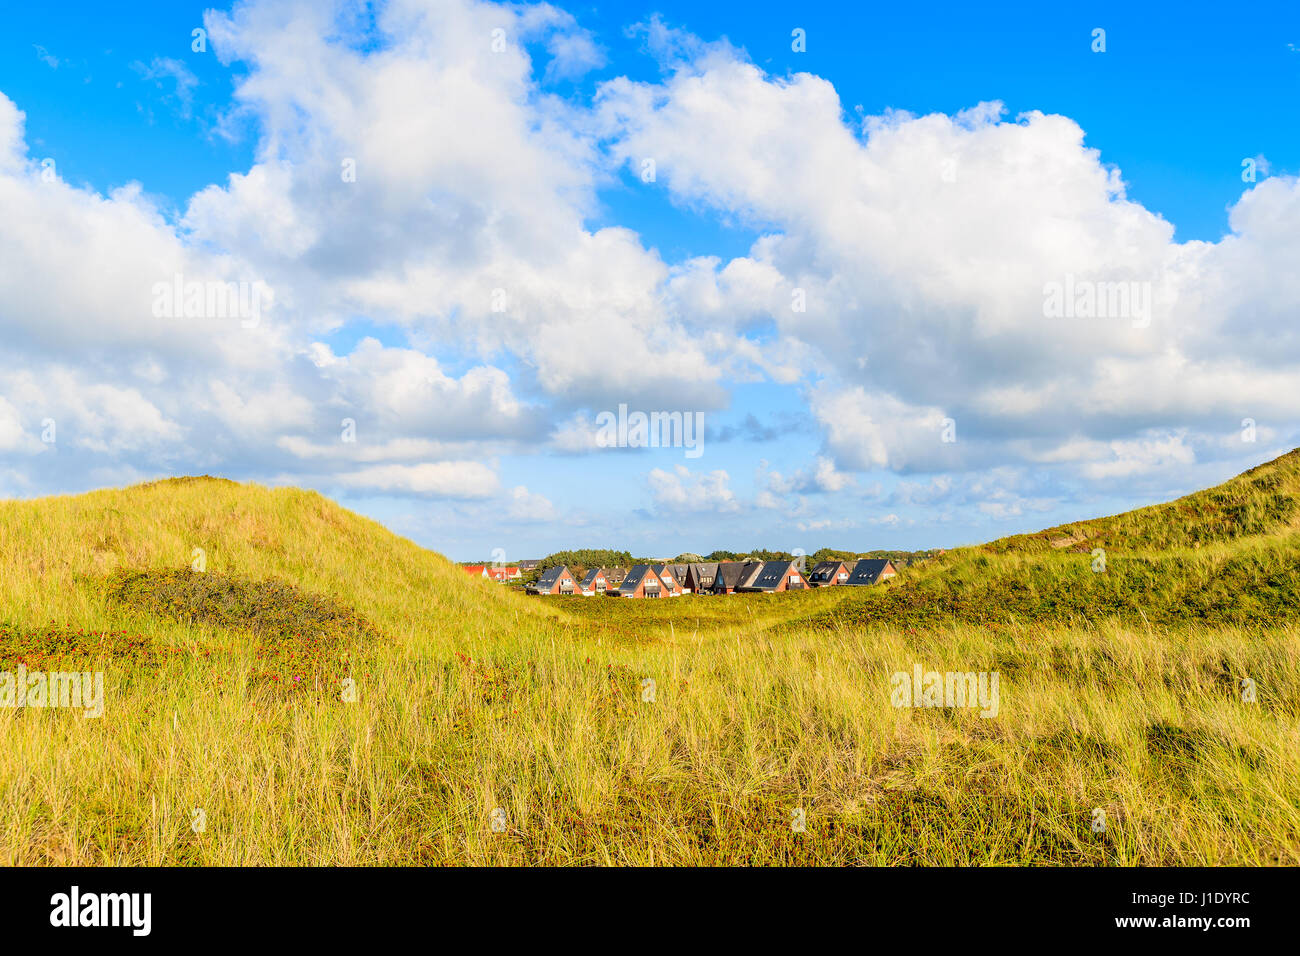 Sand dune with grass and houses of Wenningsted village in background, Sylt island, Germany Stock Photo